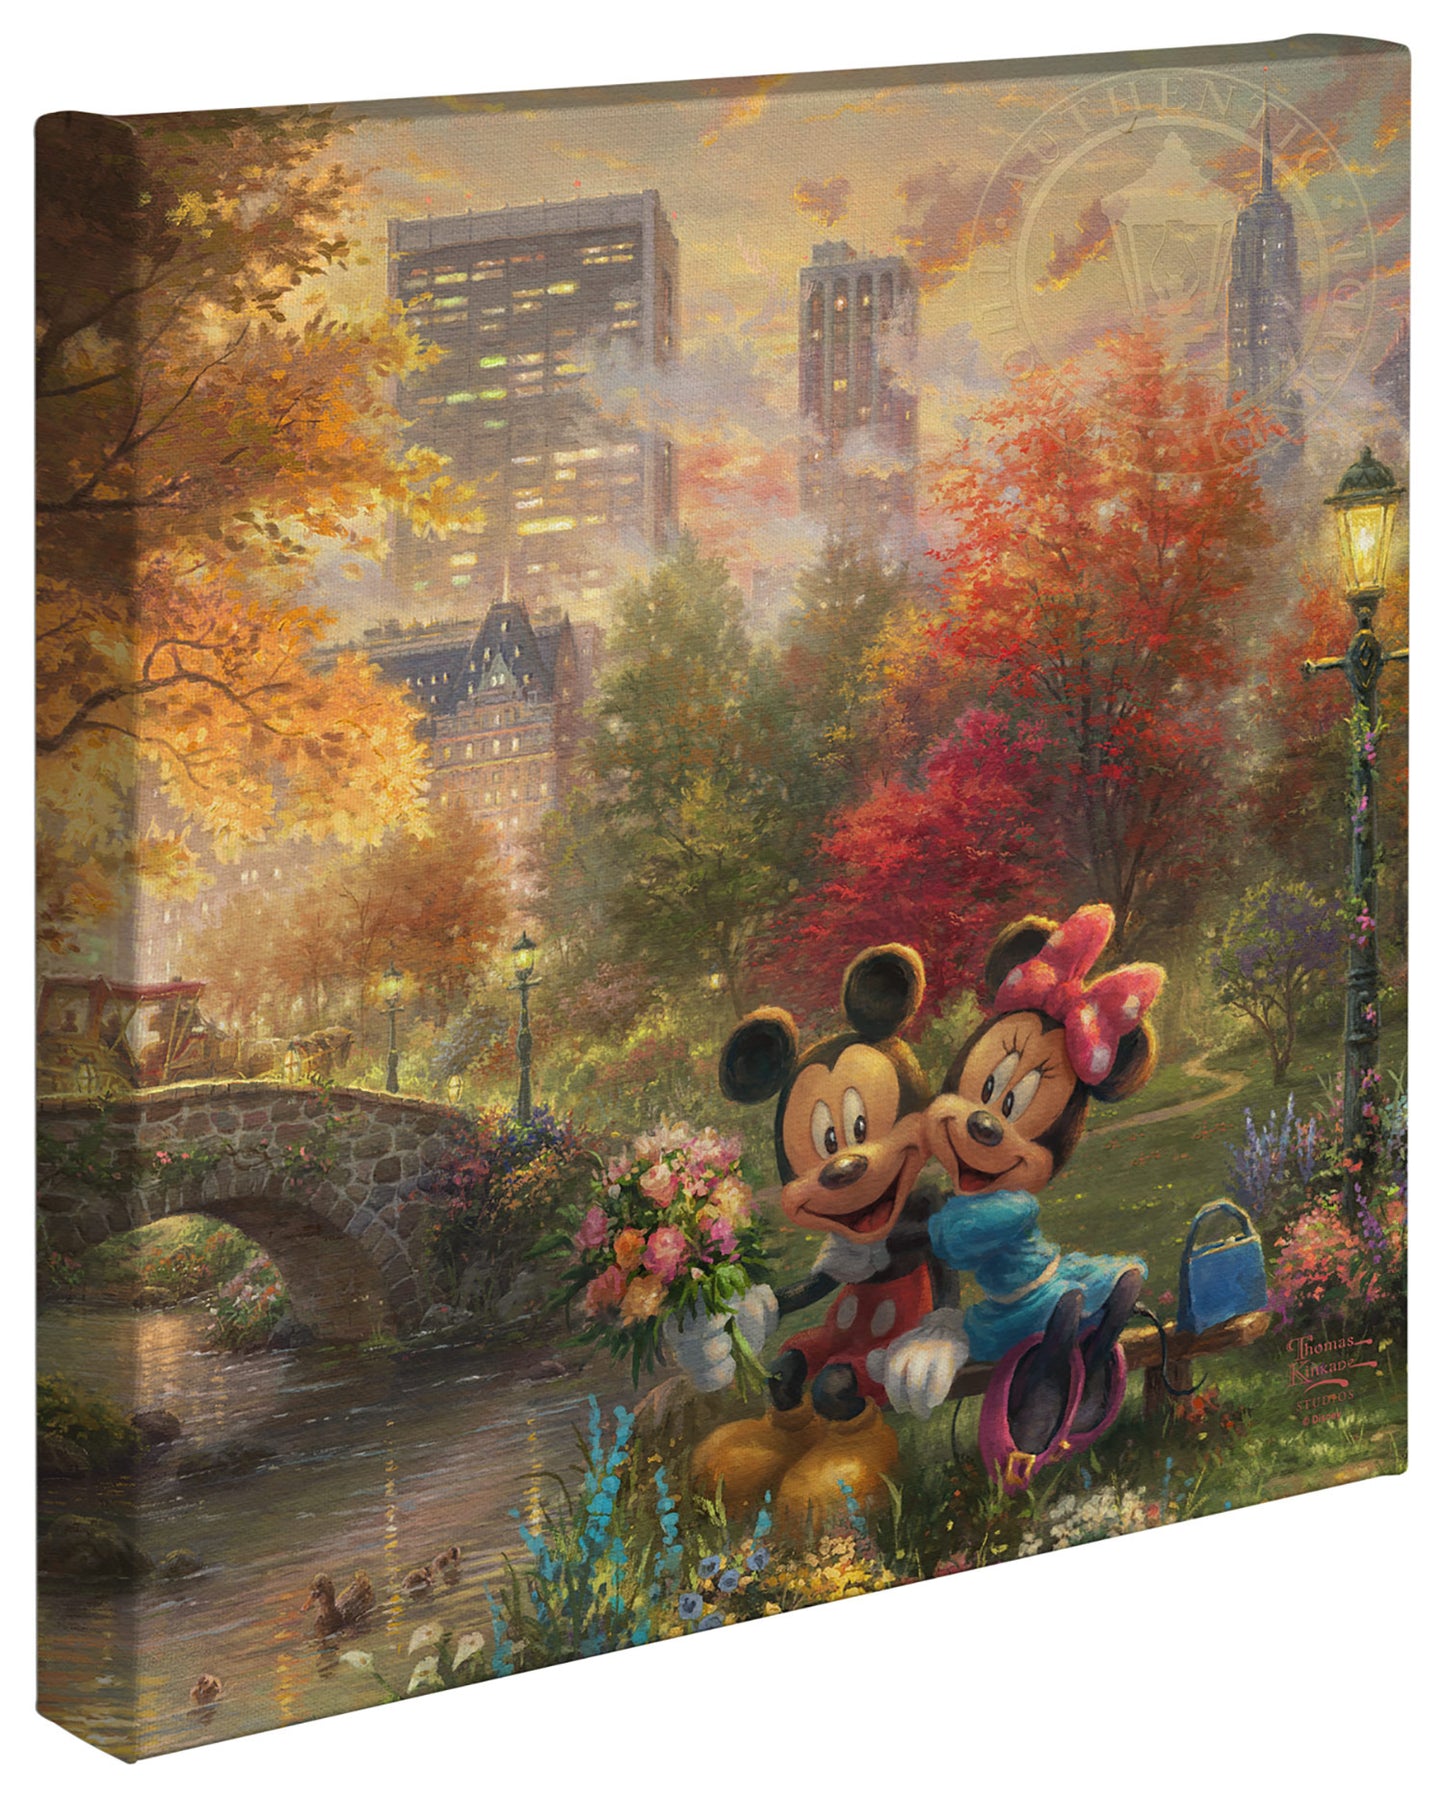 Thomas Kinkade Studios "Mickey and Minnie - Sweetheart Central Park" Limited and Open Canvas Giclee